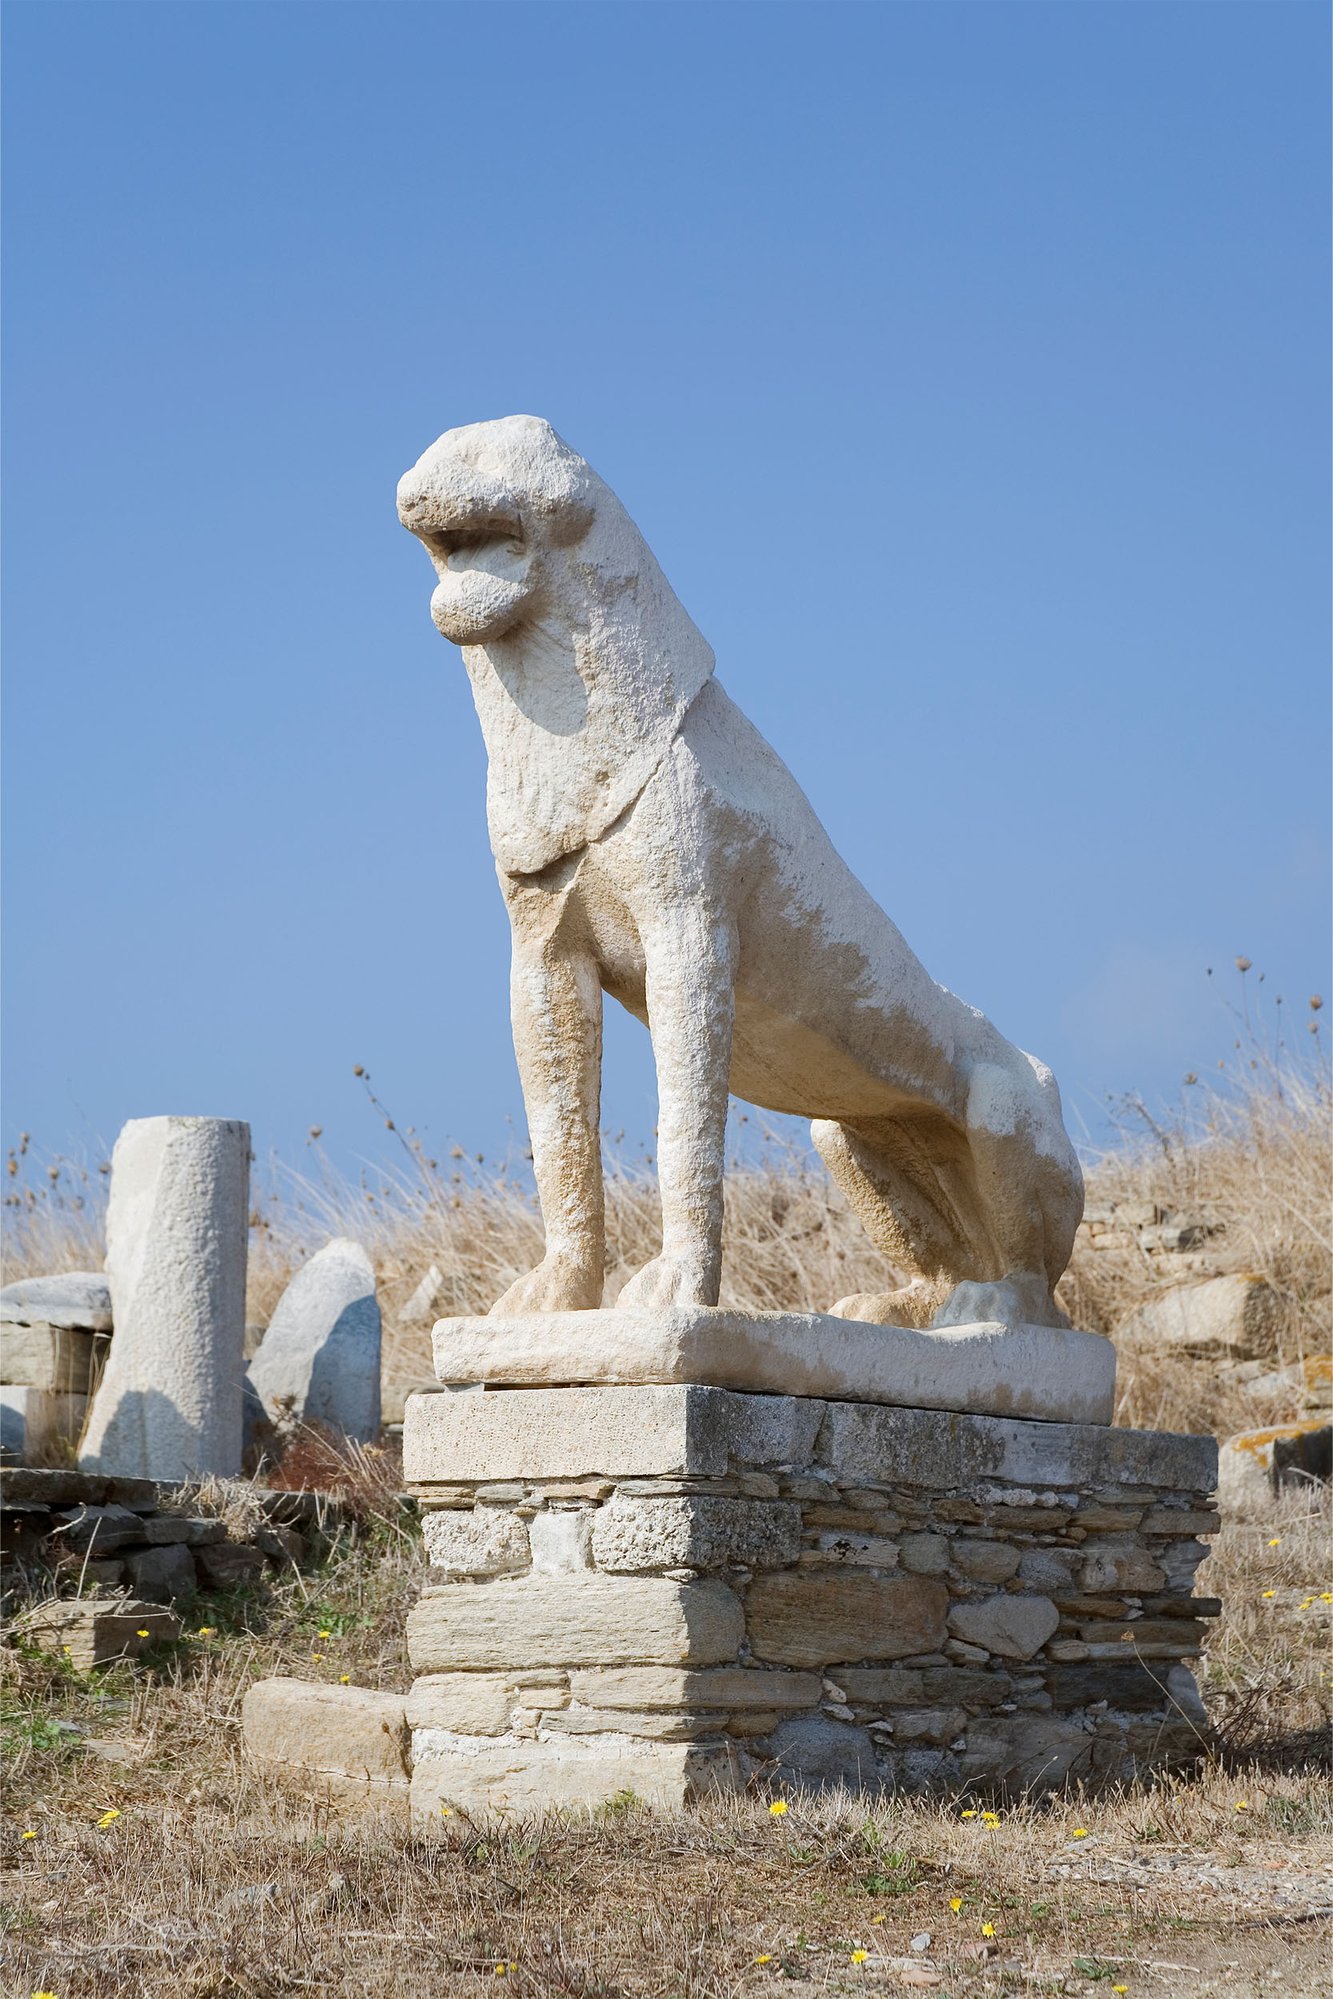 A trip to the mysterious island of Delos